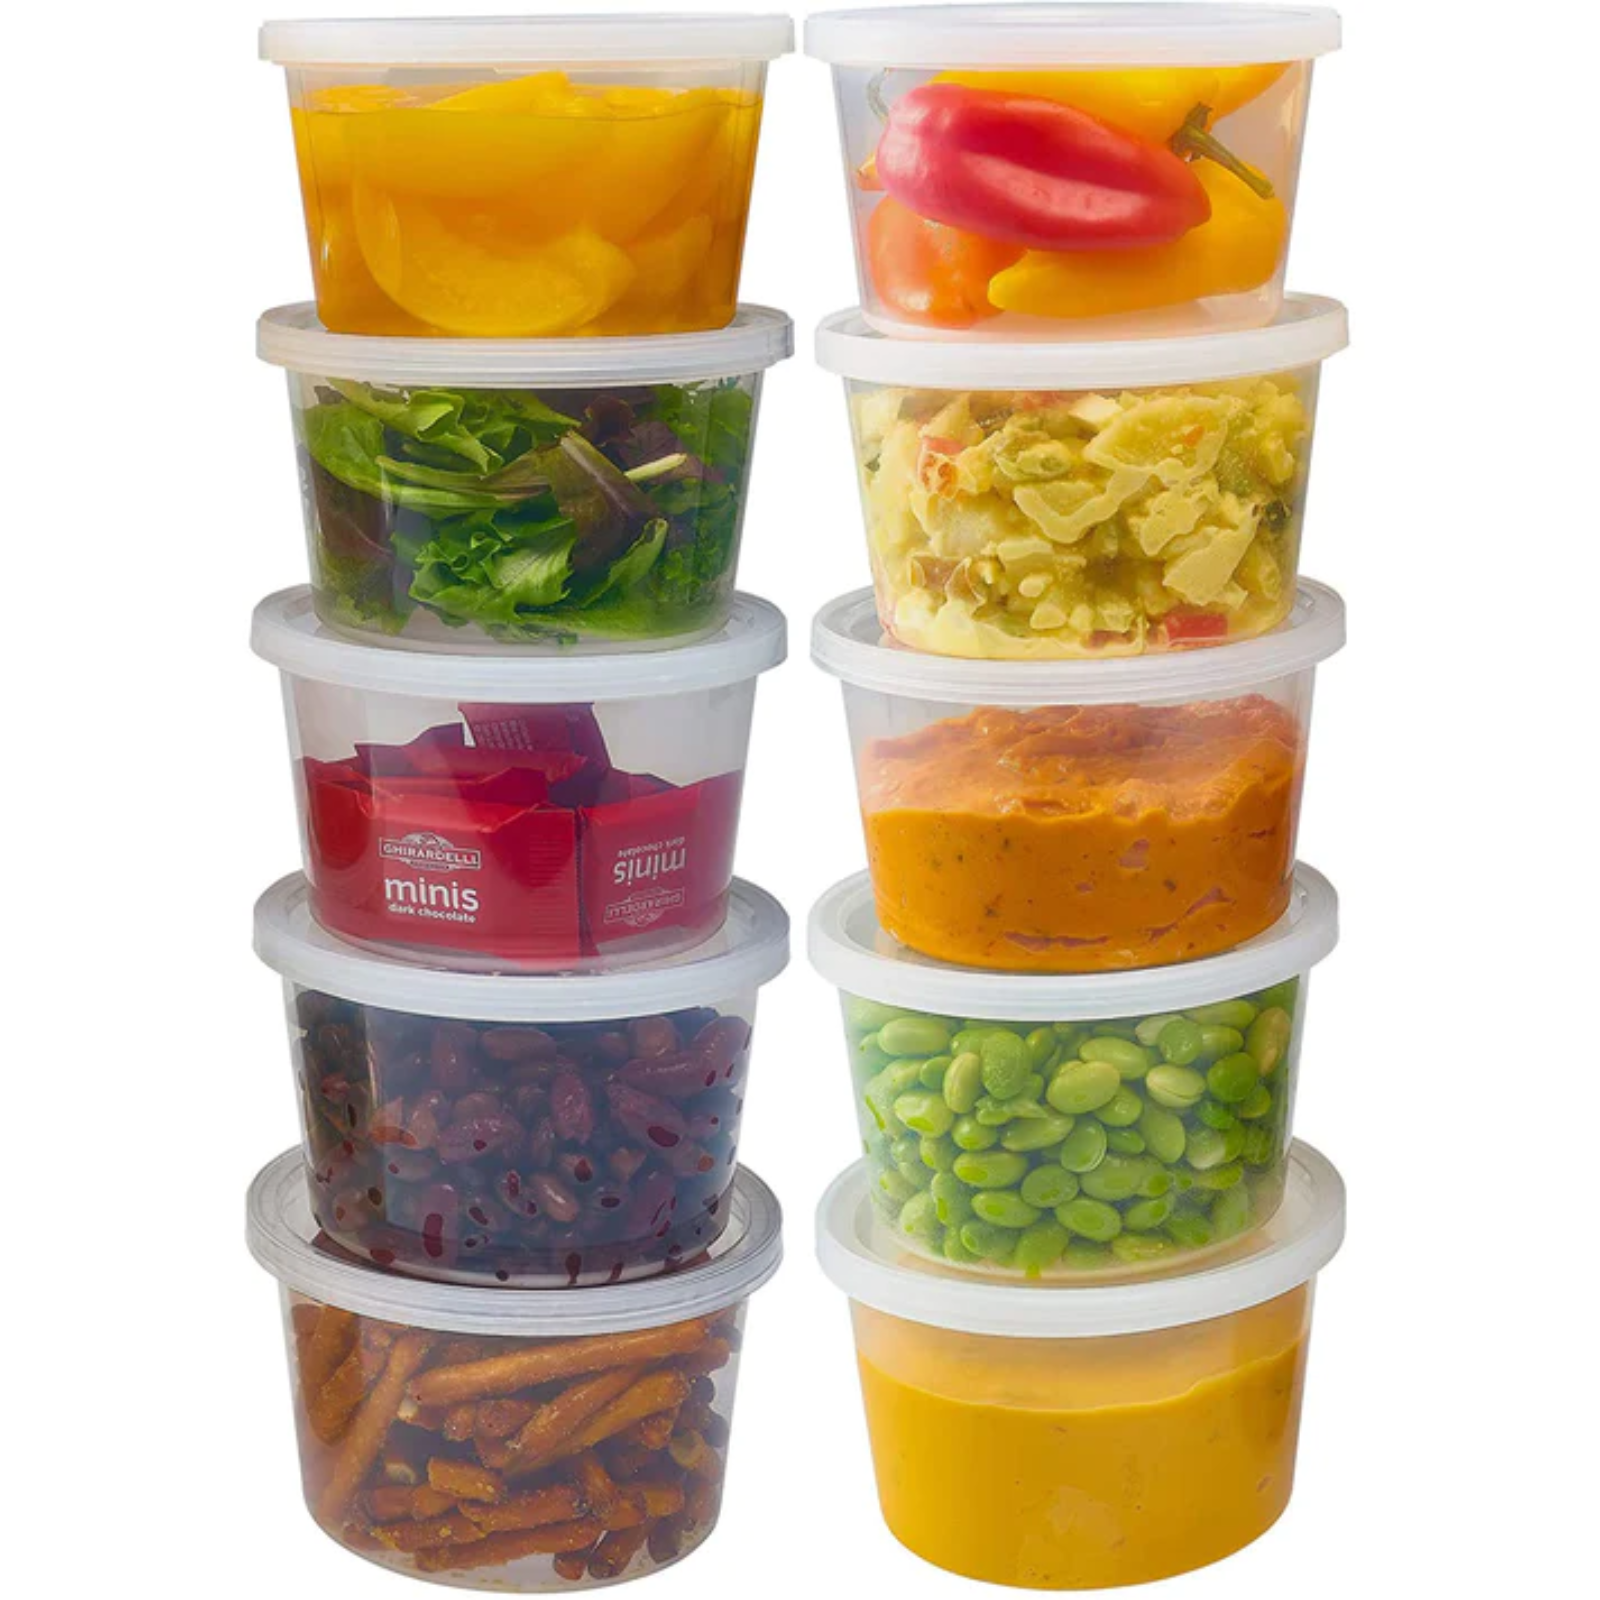 16oz Lightweight Clear Plastic Round Deli Container with Lids Food Storage & Serving VeZee   